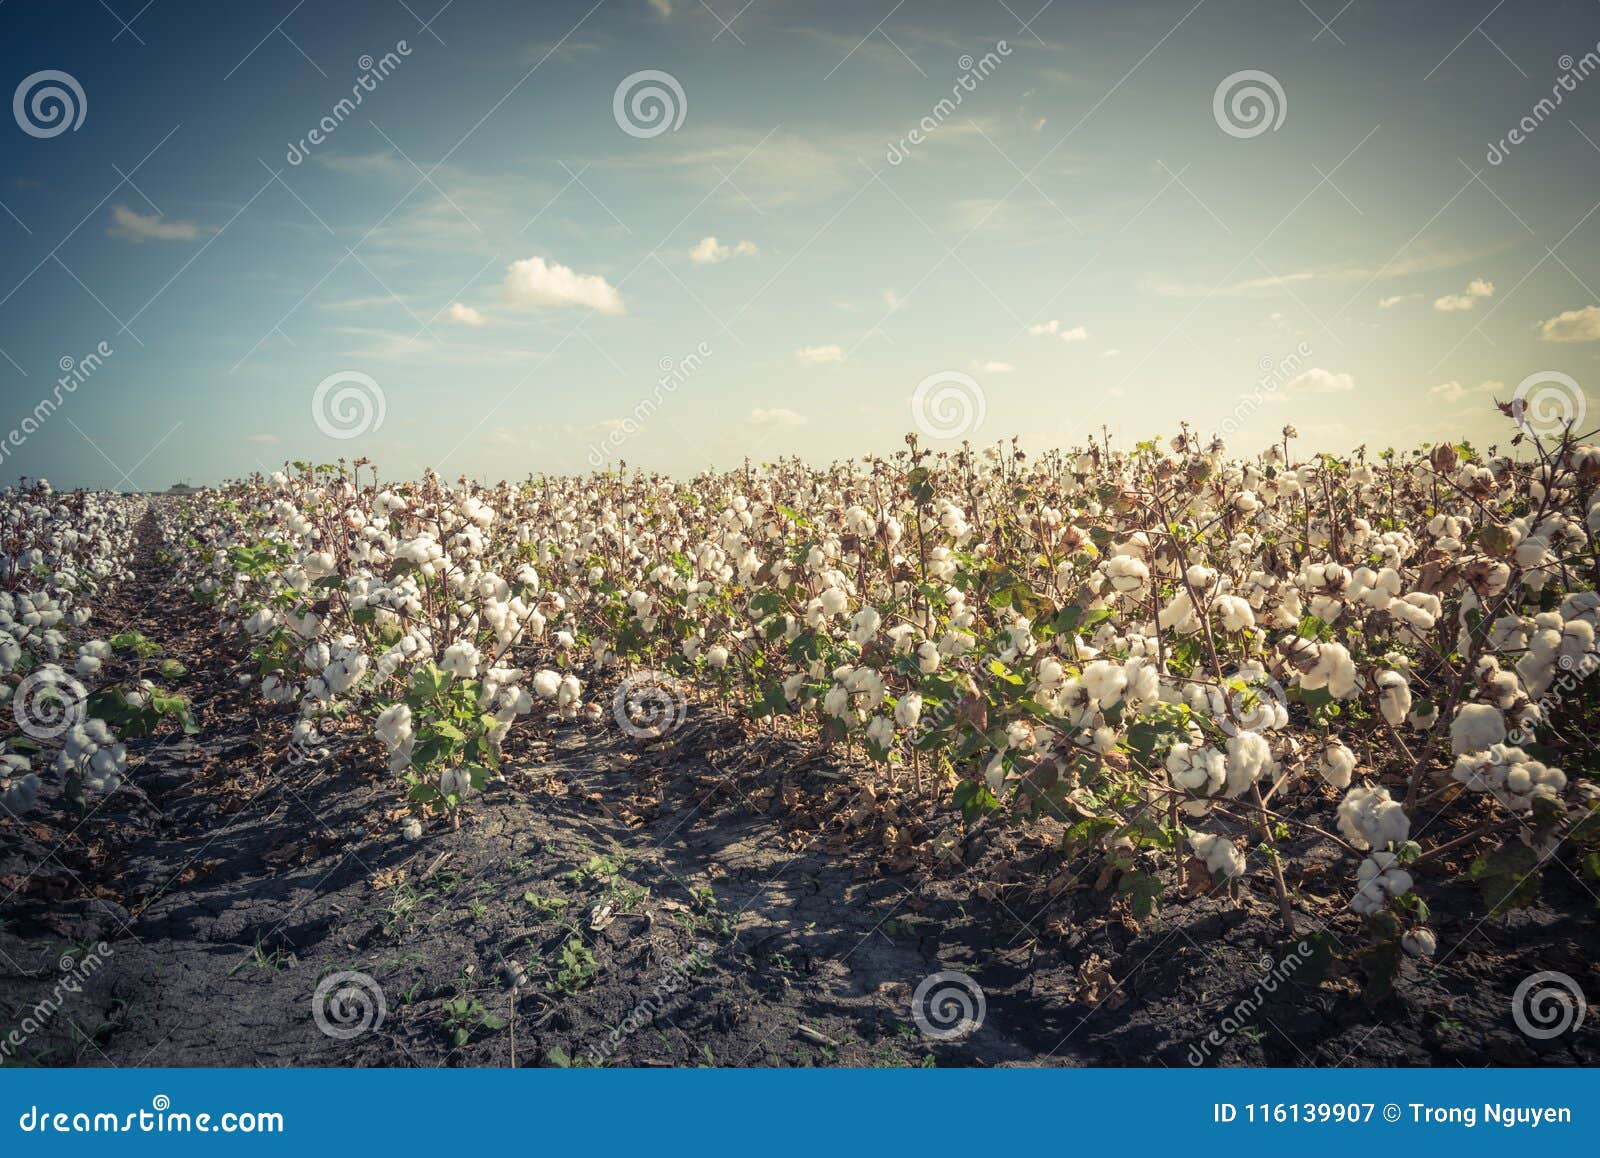 Cotton Field In Full Bloom Stock Photo, Picture and Royalty Free